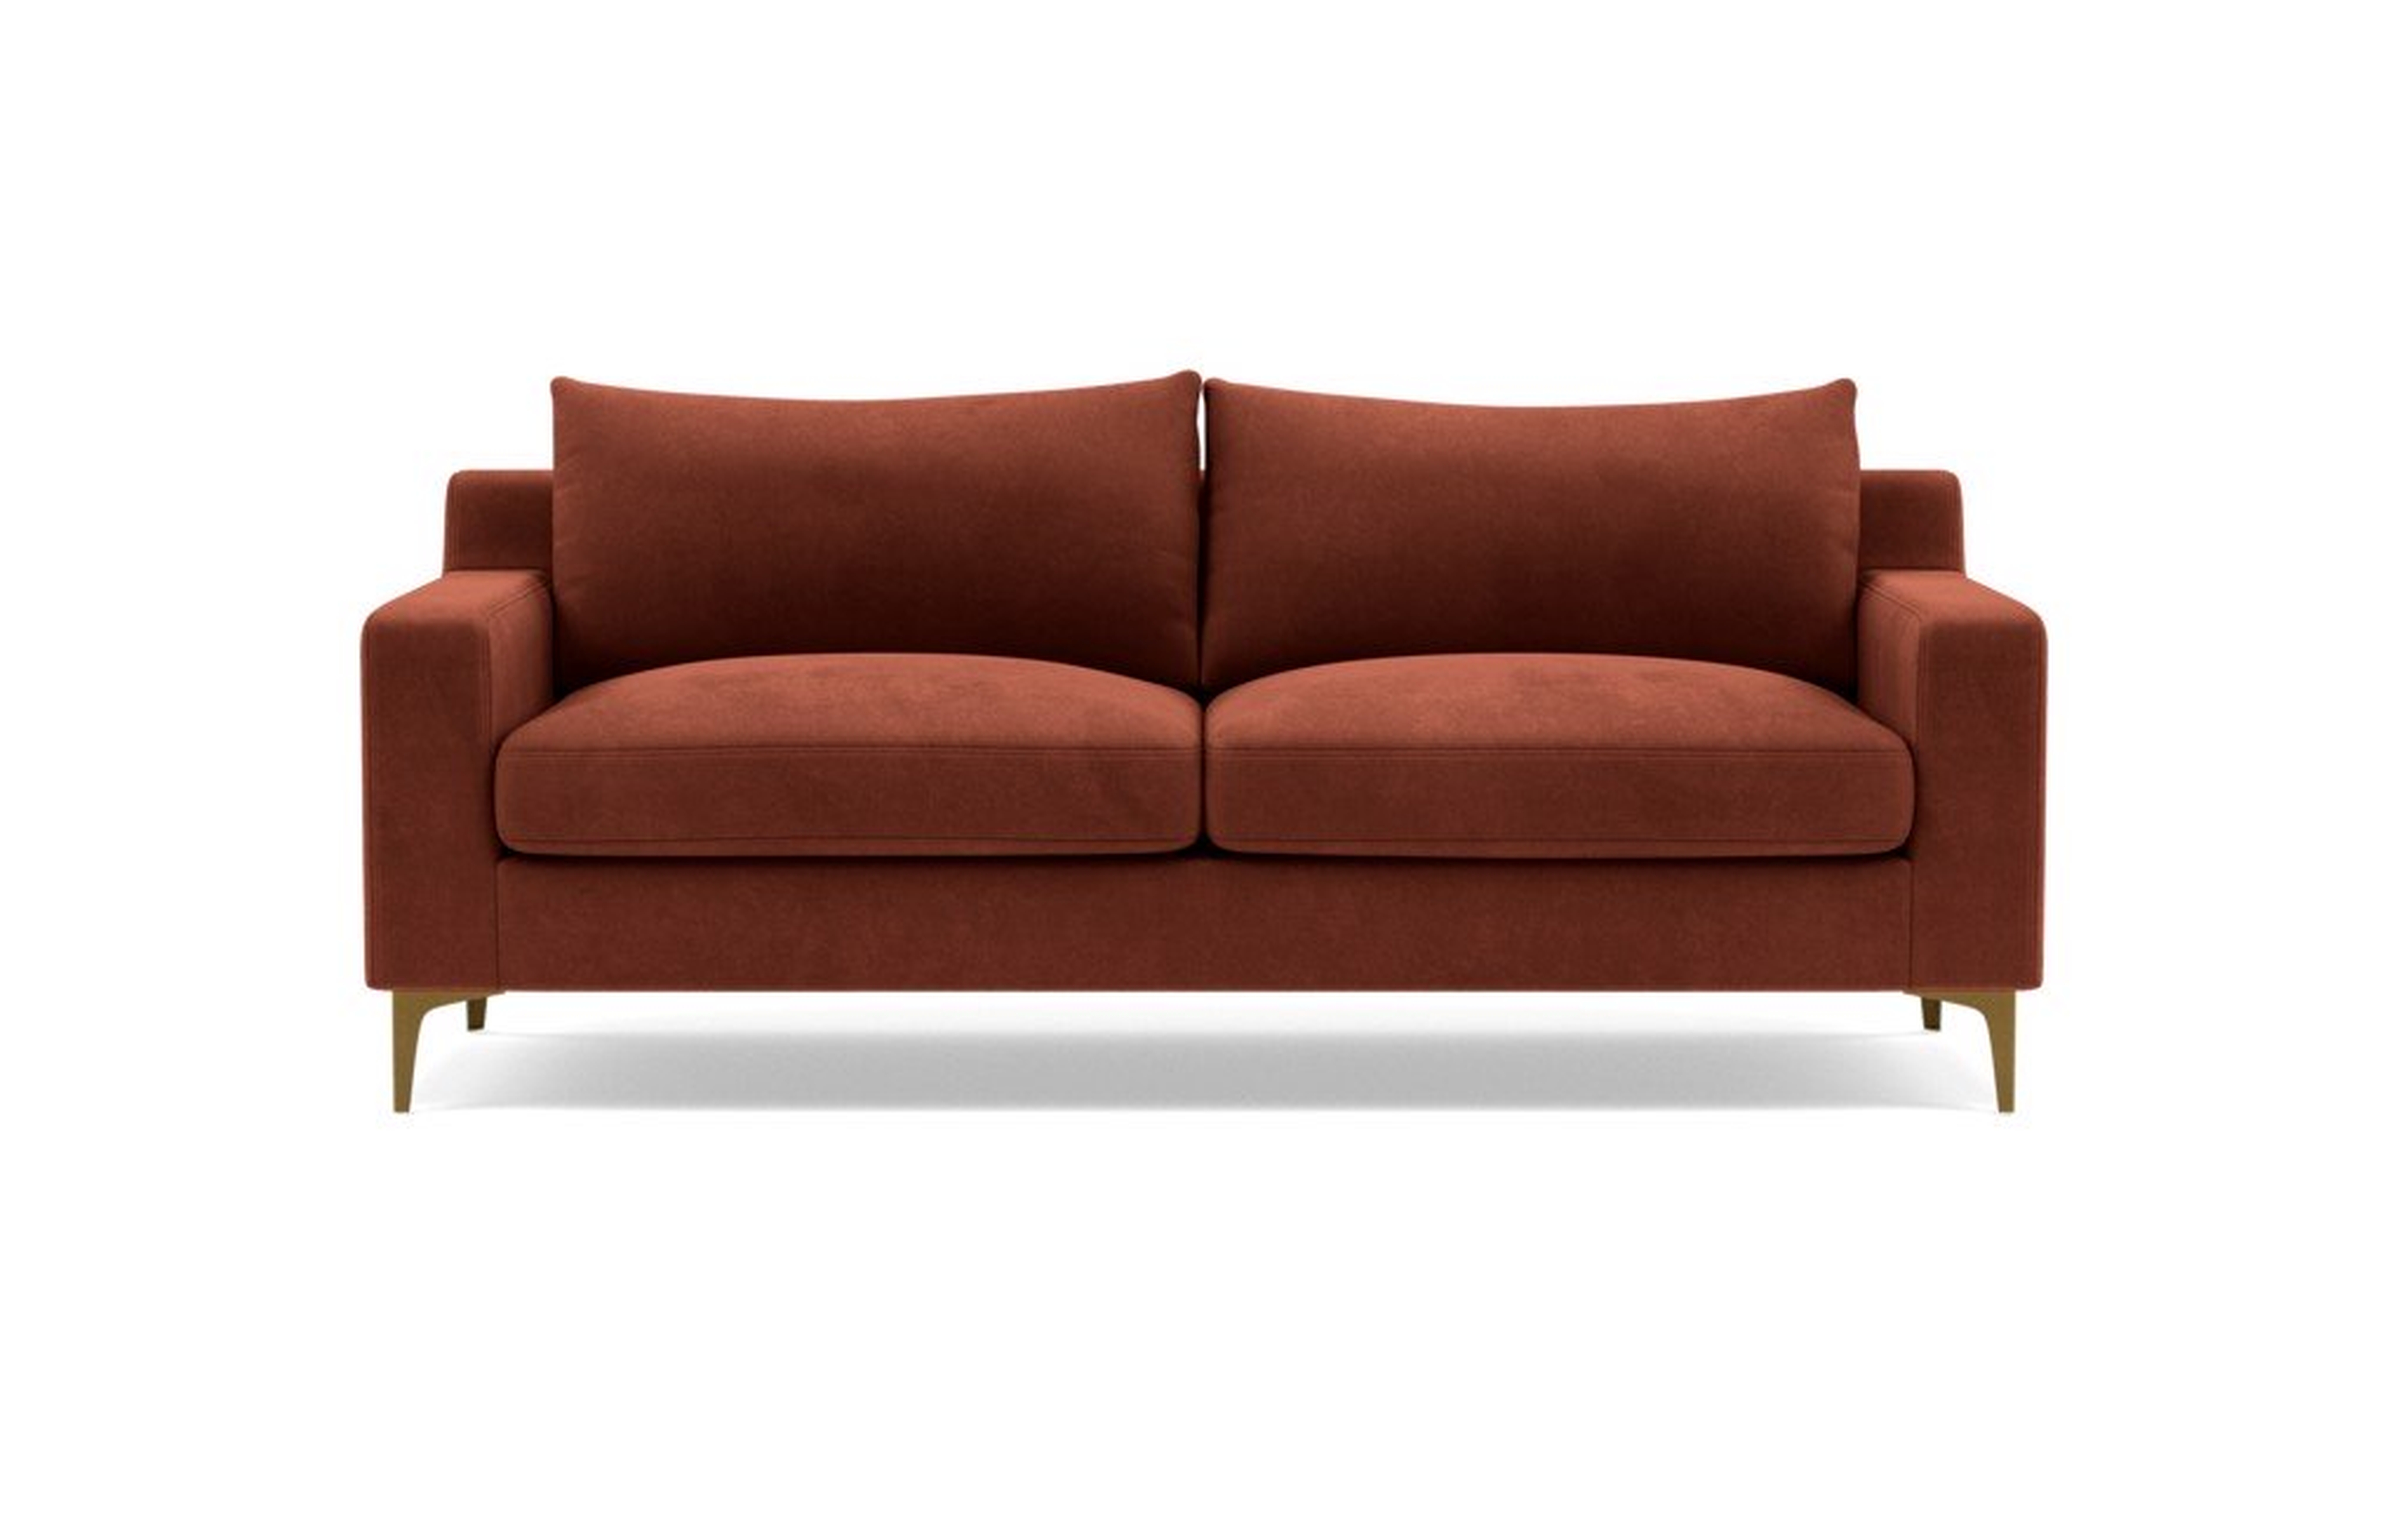 Sloan Sofa with Red Rust Fabric, down alternative cushions, and Brass Plated legs - Interior Define